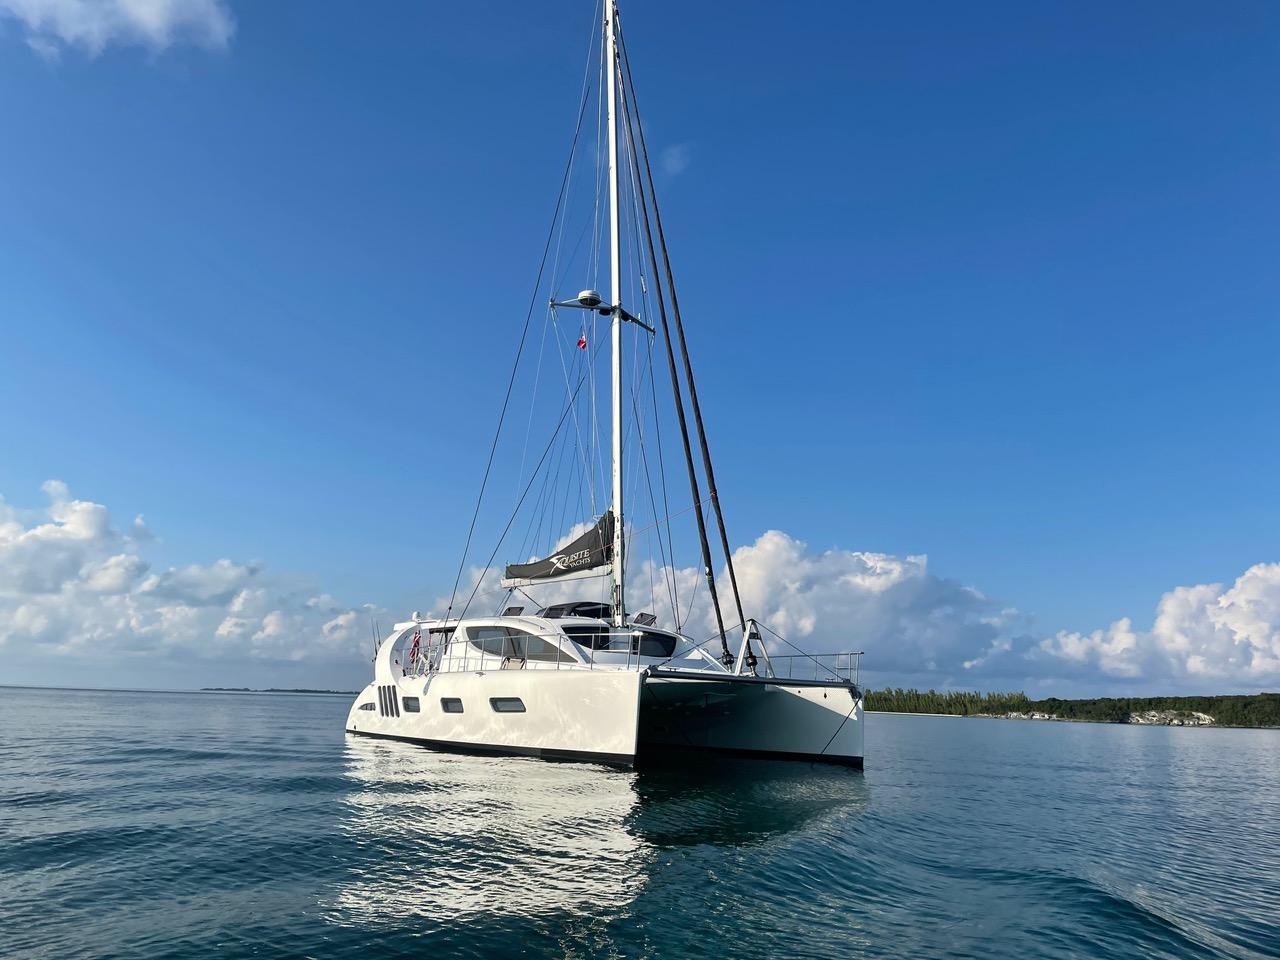 xquisite yachts for sale